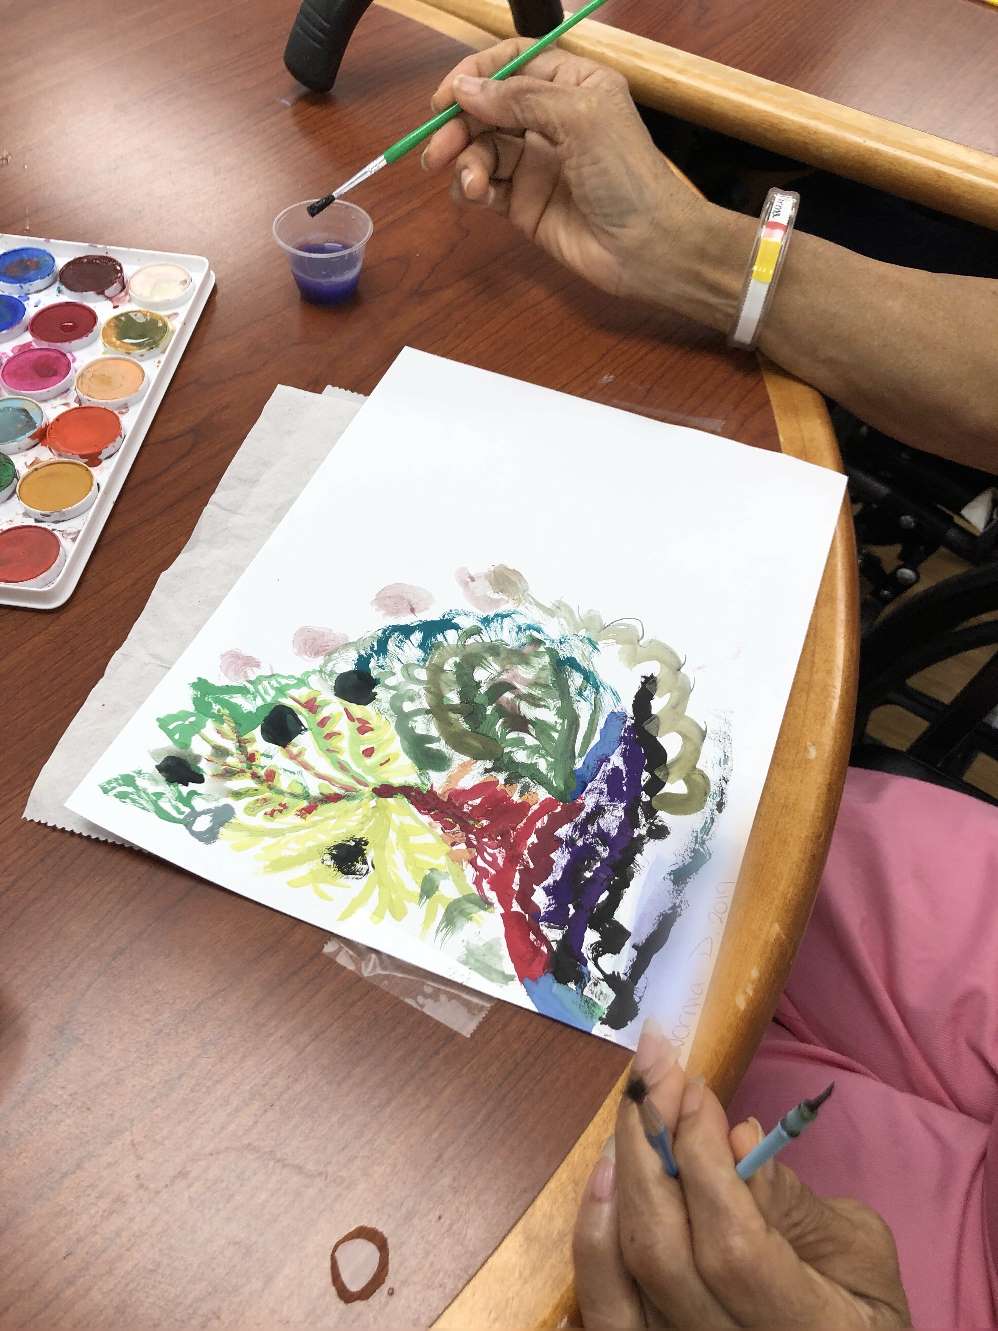 Ross residents completed such beautiful watercolor paintings